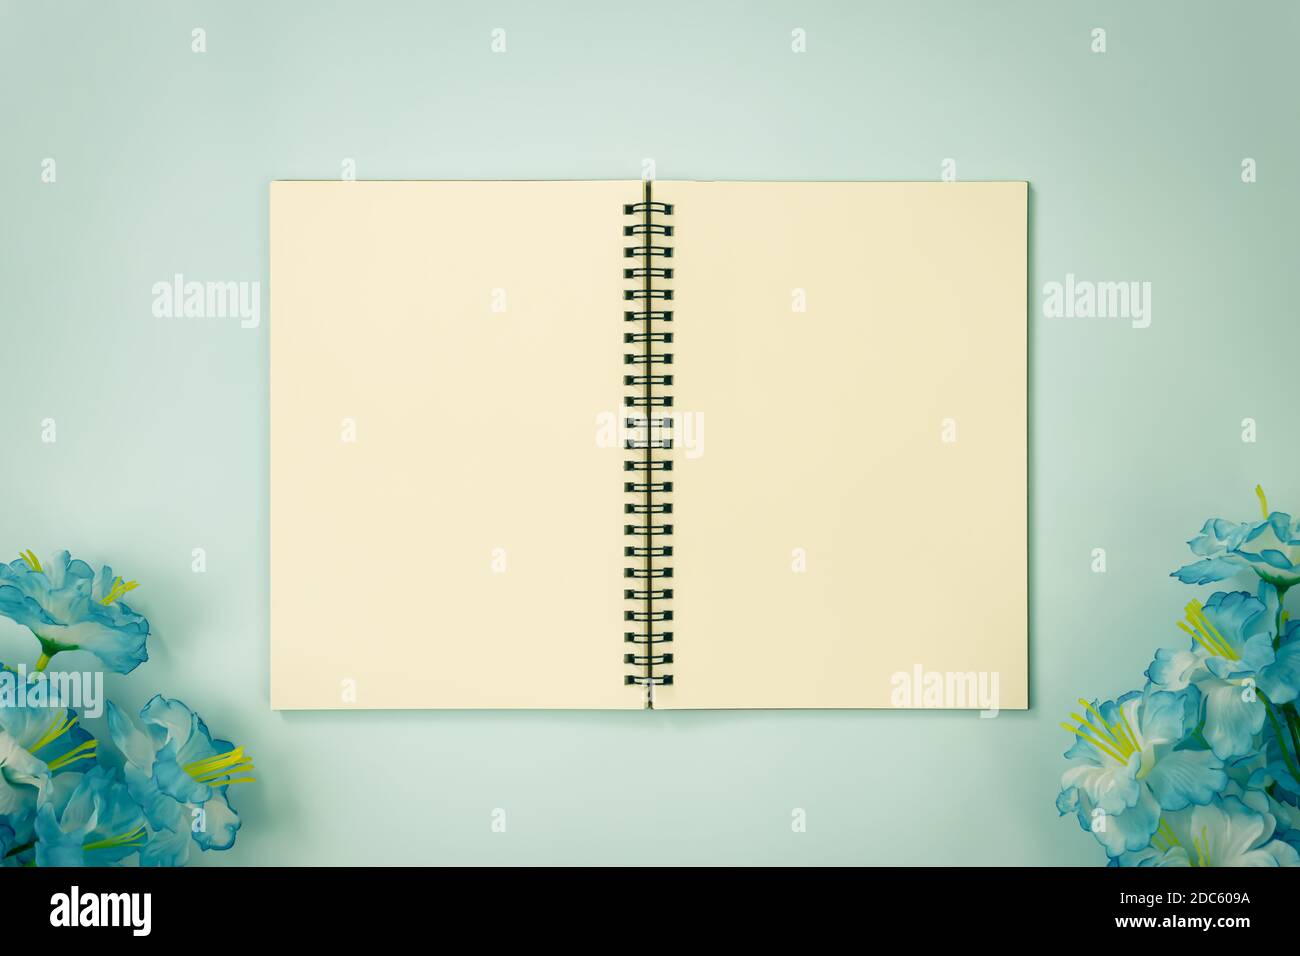 Top Table Spiral Notebook or Spring Notebook Mockup in Unlined Type on Center Frame and Blue Flowers at Bottom on Blue Pastel Minimalist Background in Stock Photo